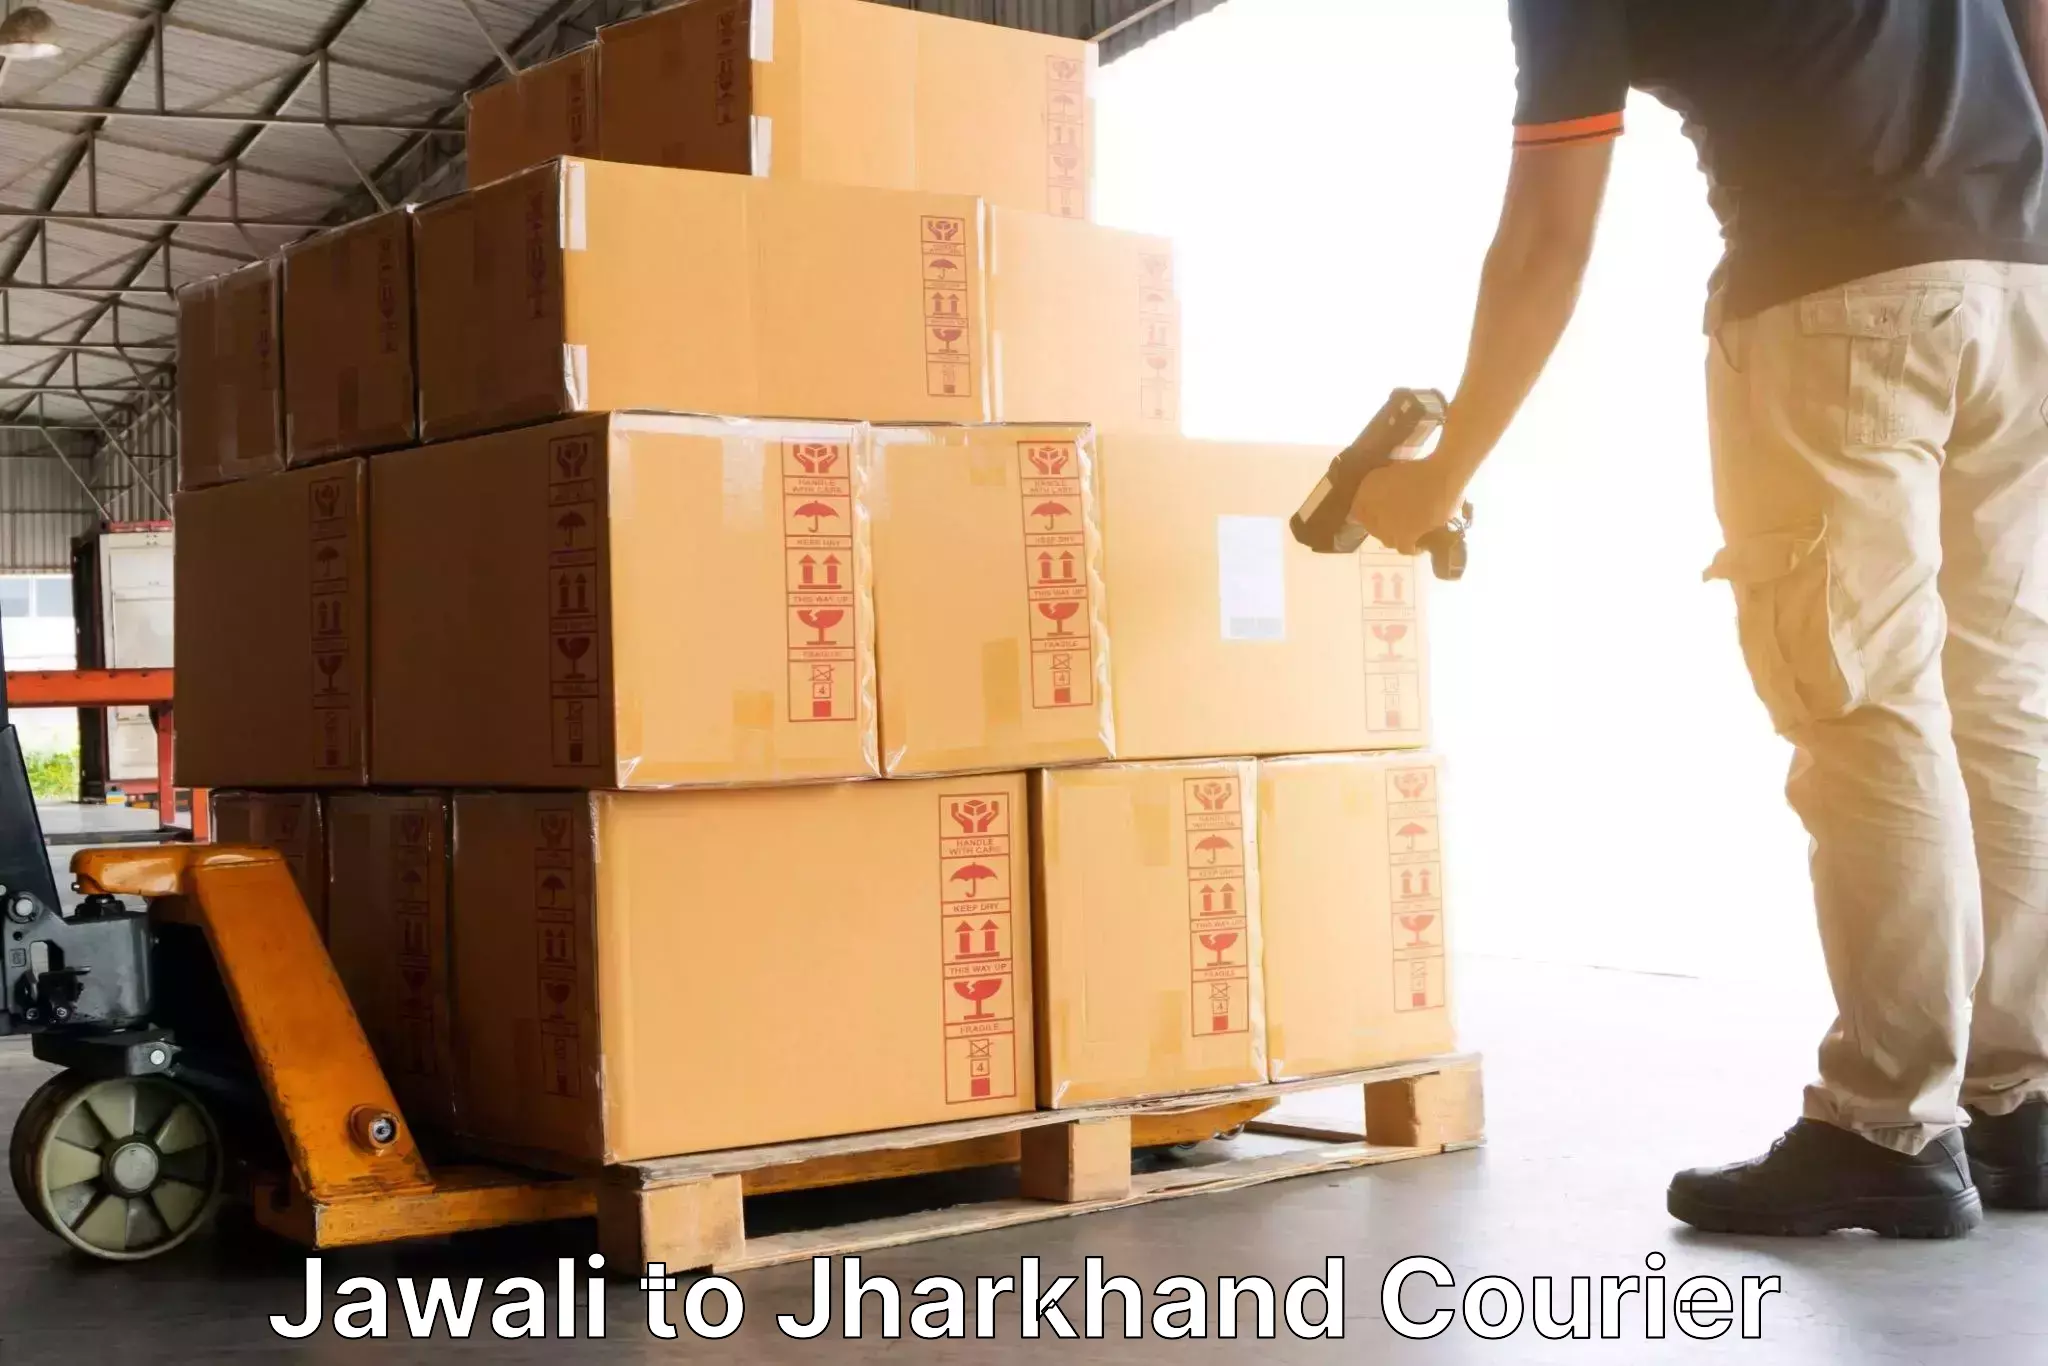 Express courier facilities in Jawali to Domchanch